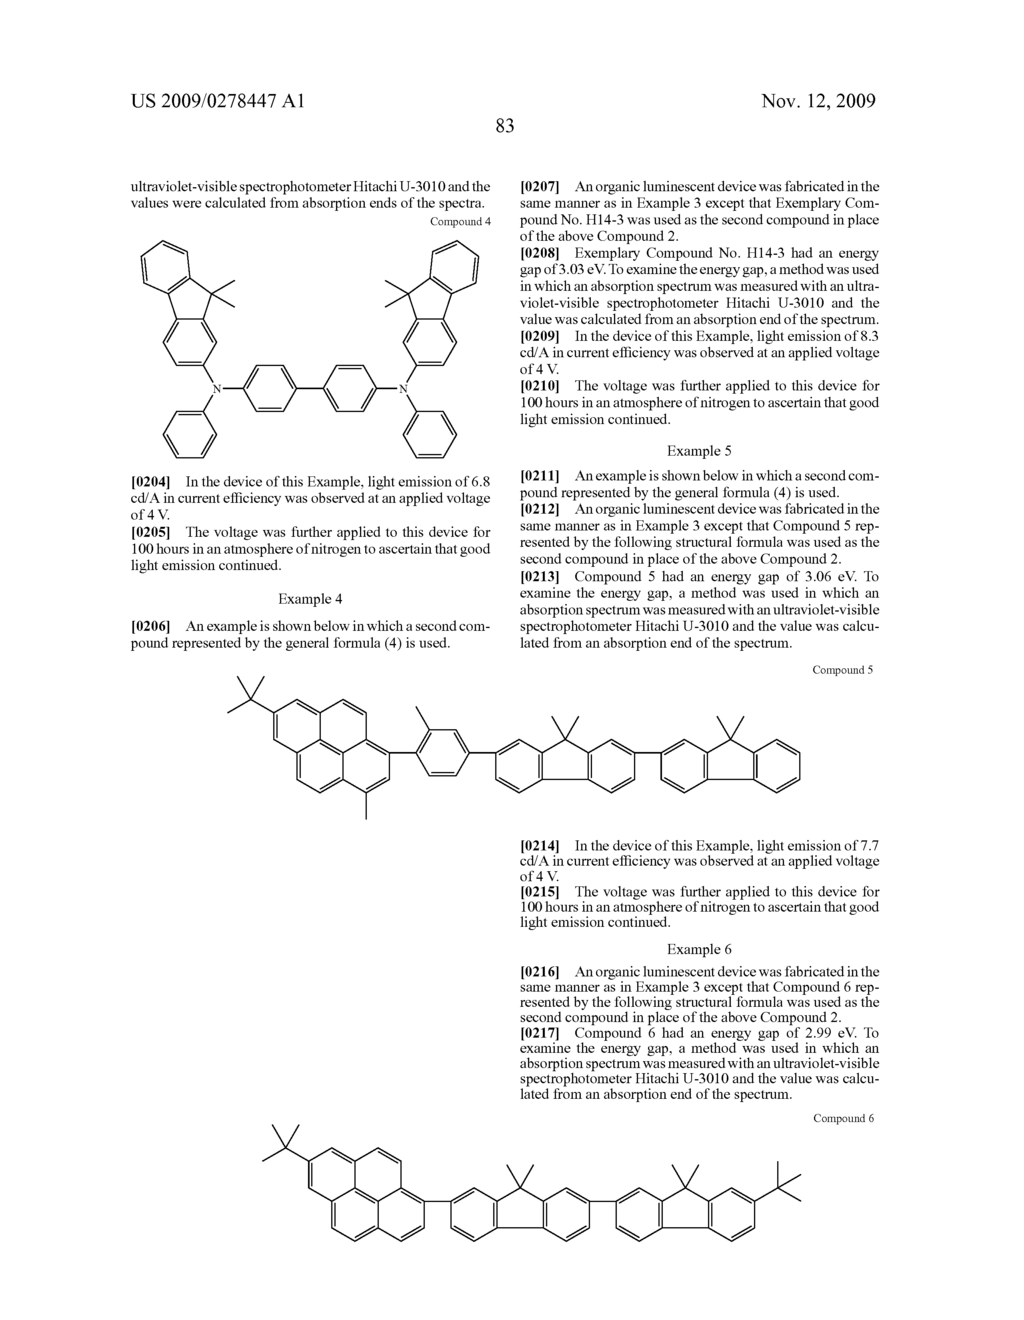 ORGANIC LUMINESCENT DEVICE AND BENZO[k]FLUORANTHENE COMPOUND - diagram, schematic, and image 89